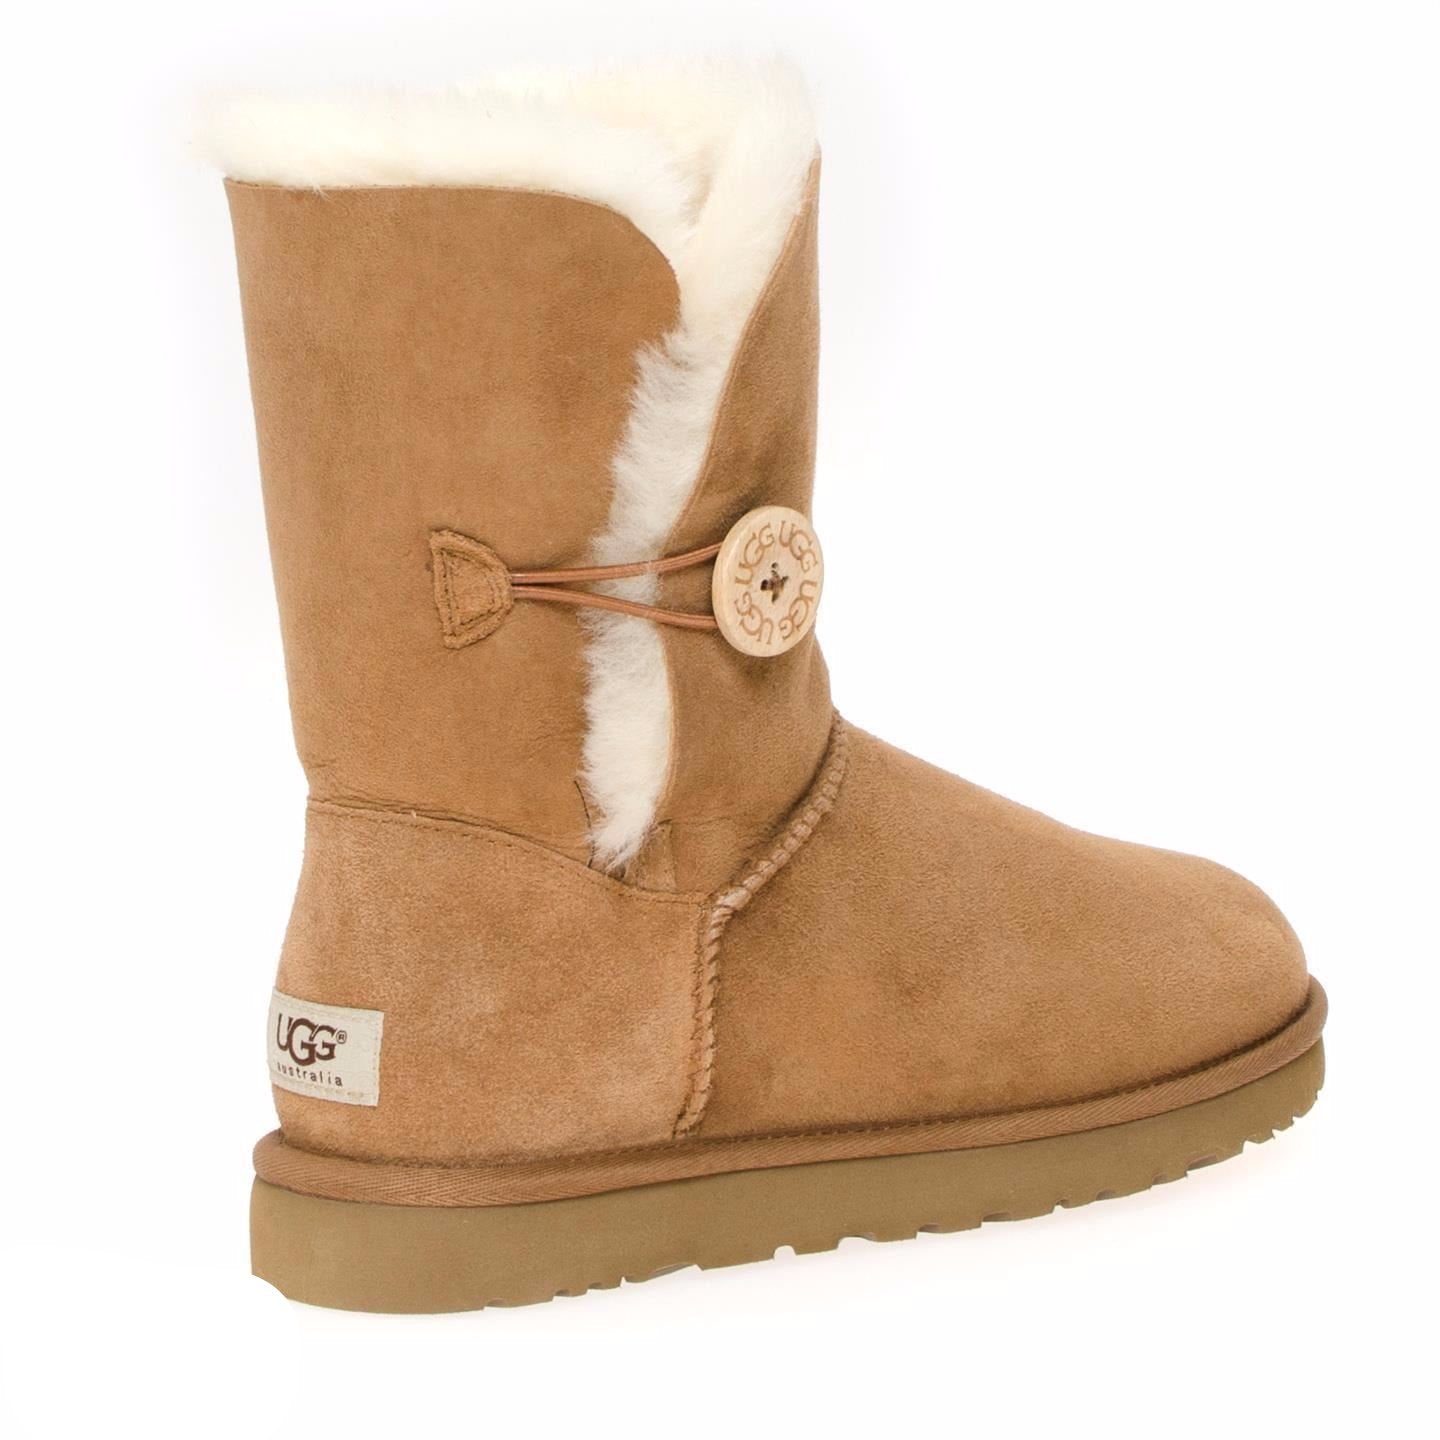 Ugg Bailey Button Chestnut Boots Mycozyboots